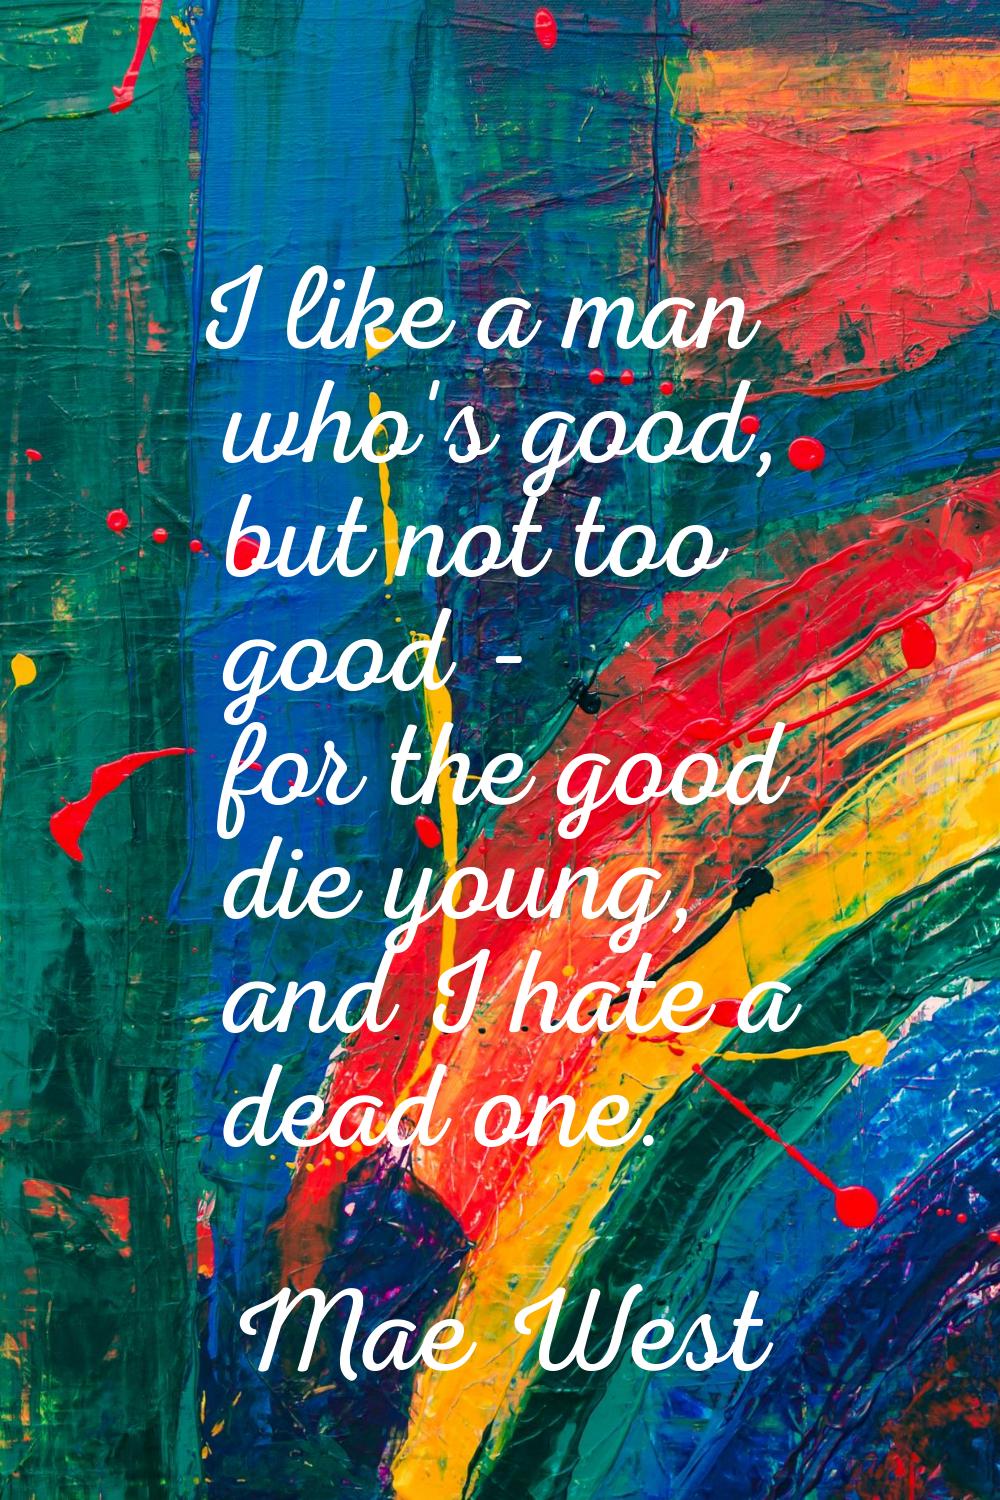 I like a man who's good, but not too good - for the good die young, and I hate a dead one.